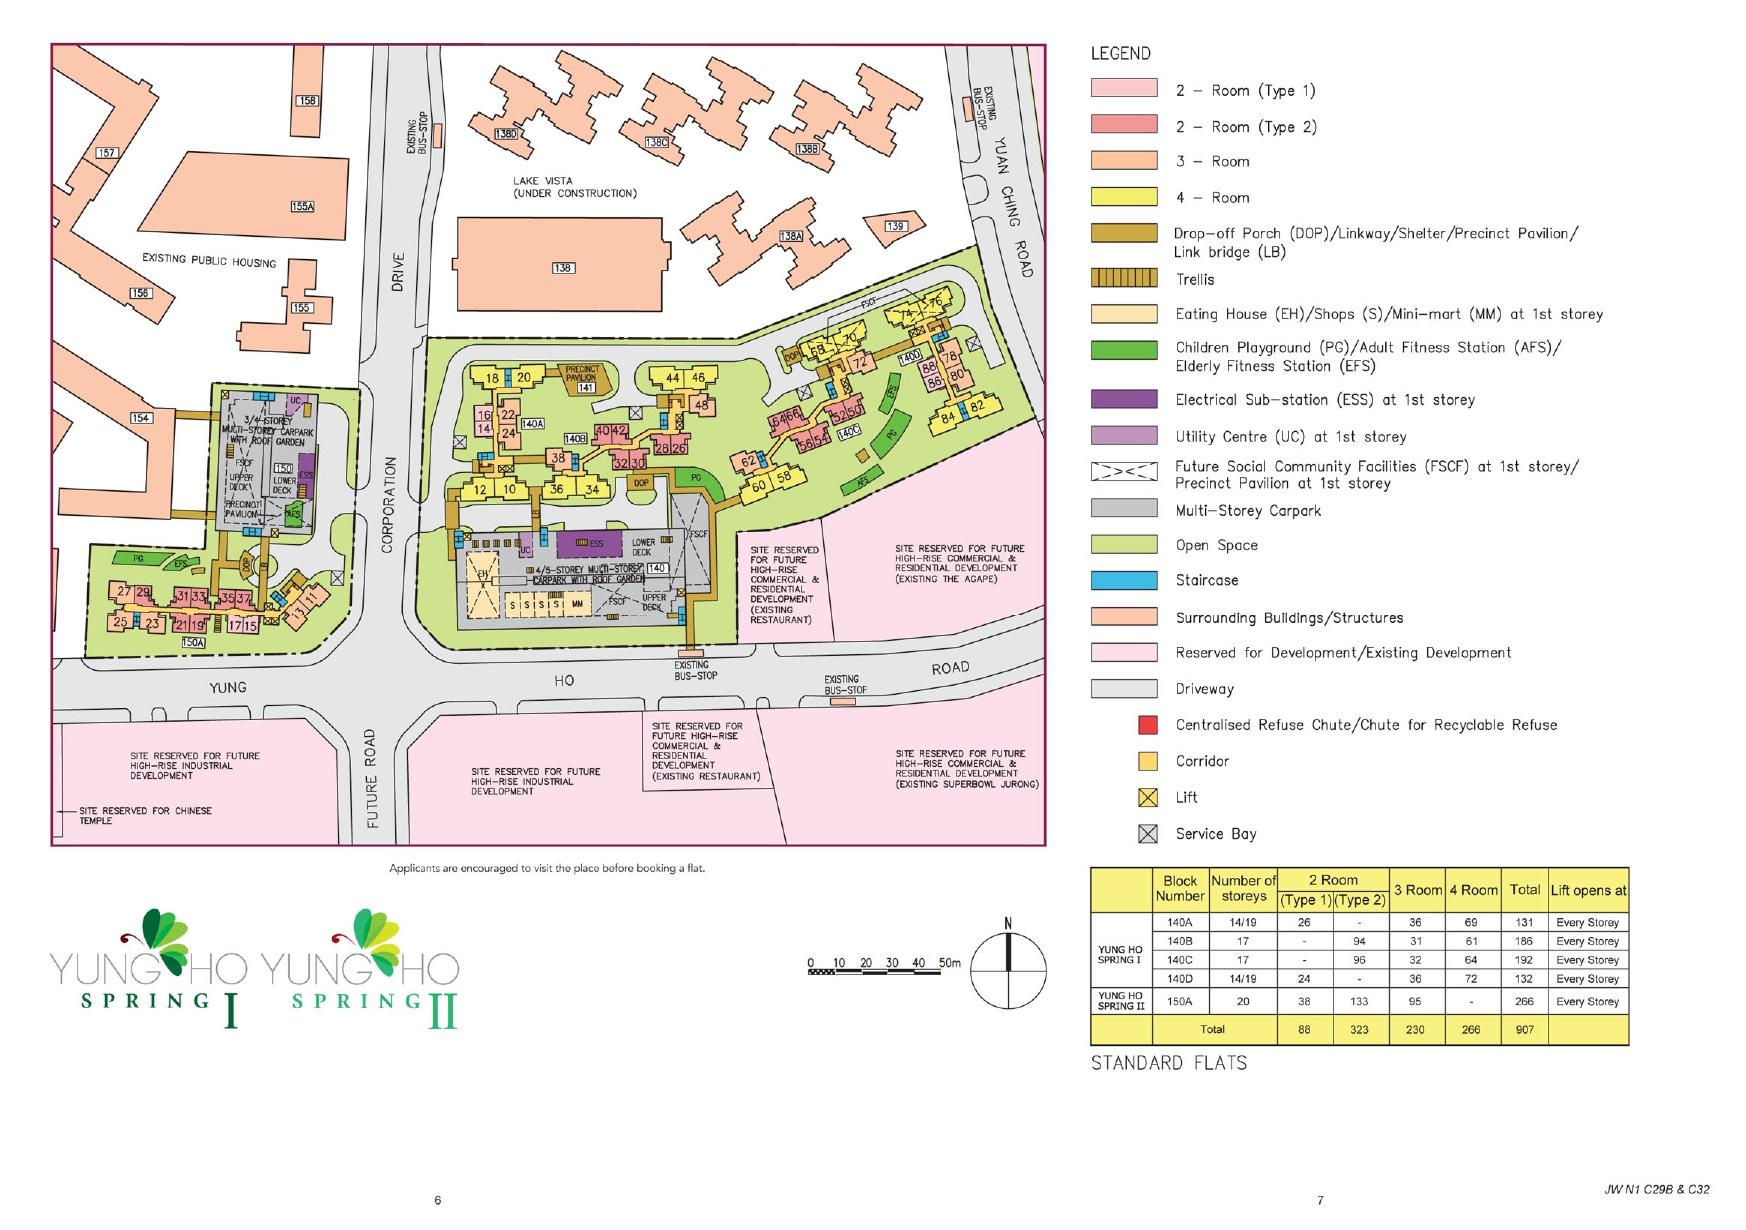 Yung Ho Spring I Site Plan